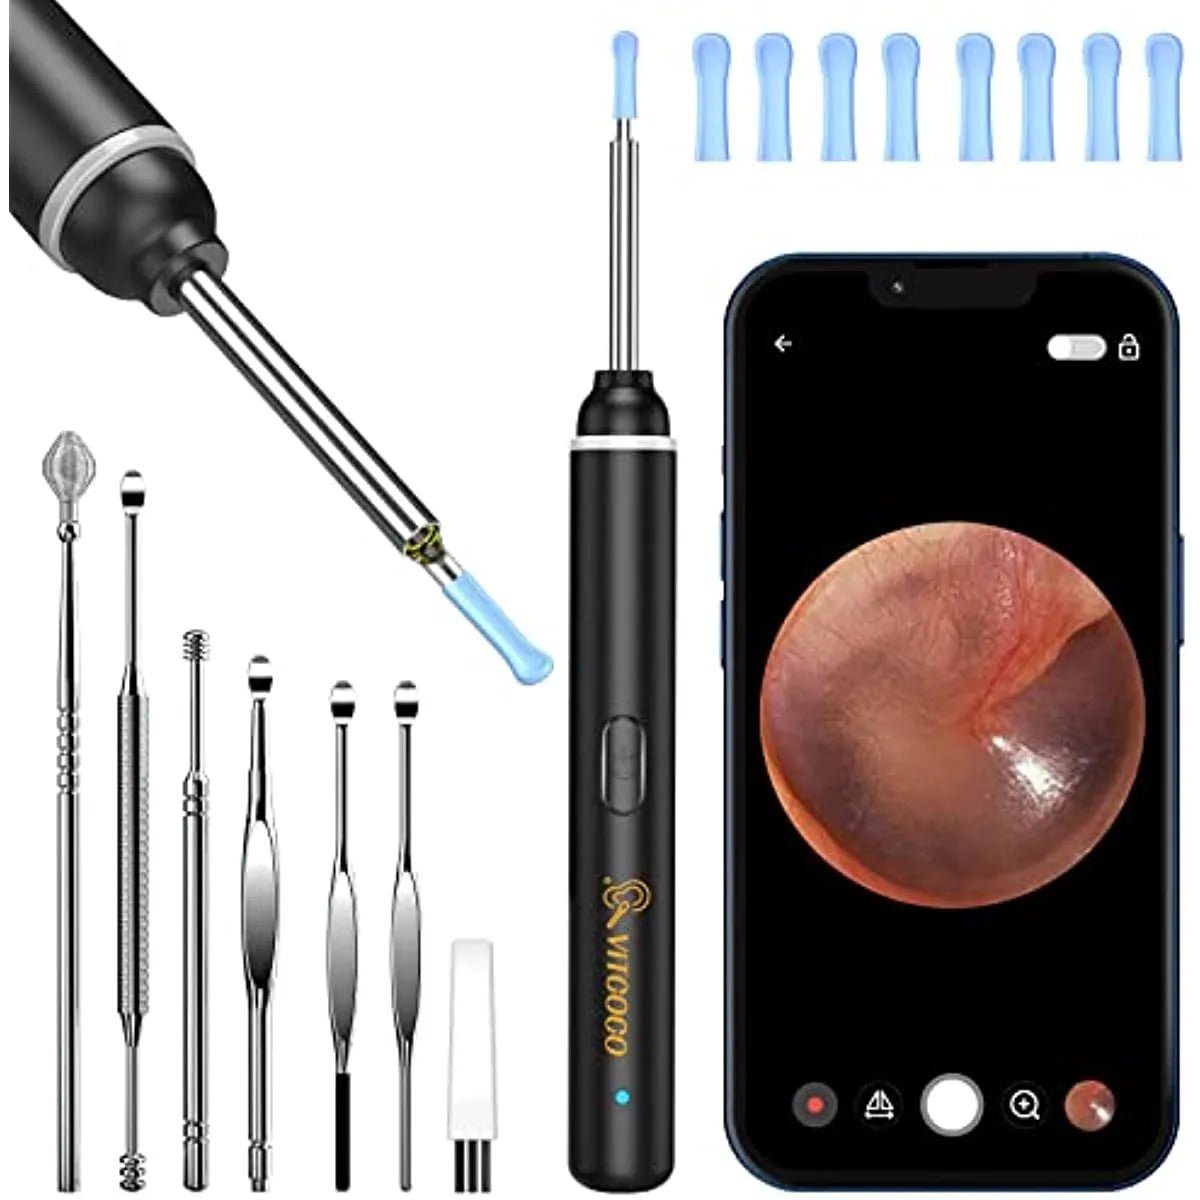 The Very Best Ear Wax Removal Tool - 1920P HD with LED Lights for iPhone, iPad, Android | Precision Ear Care - KME means the very best